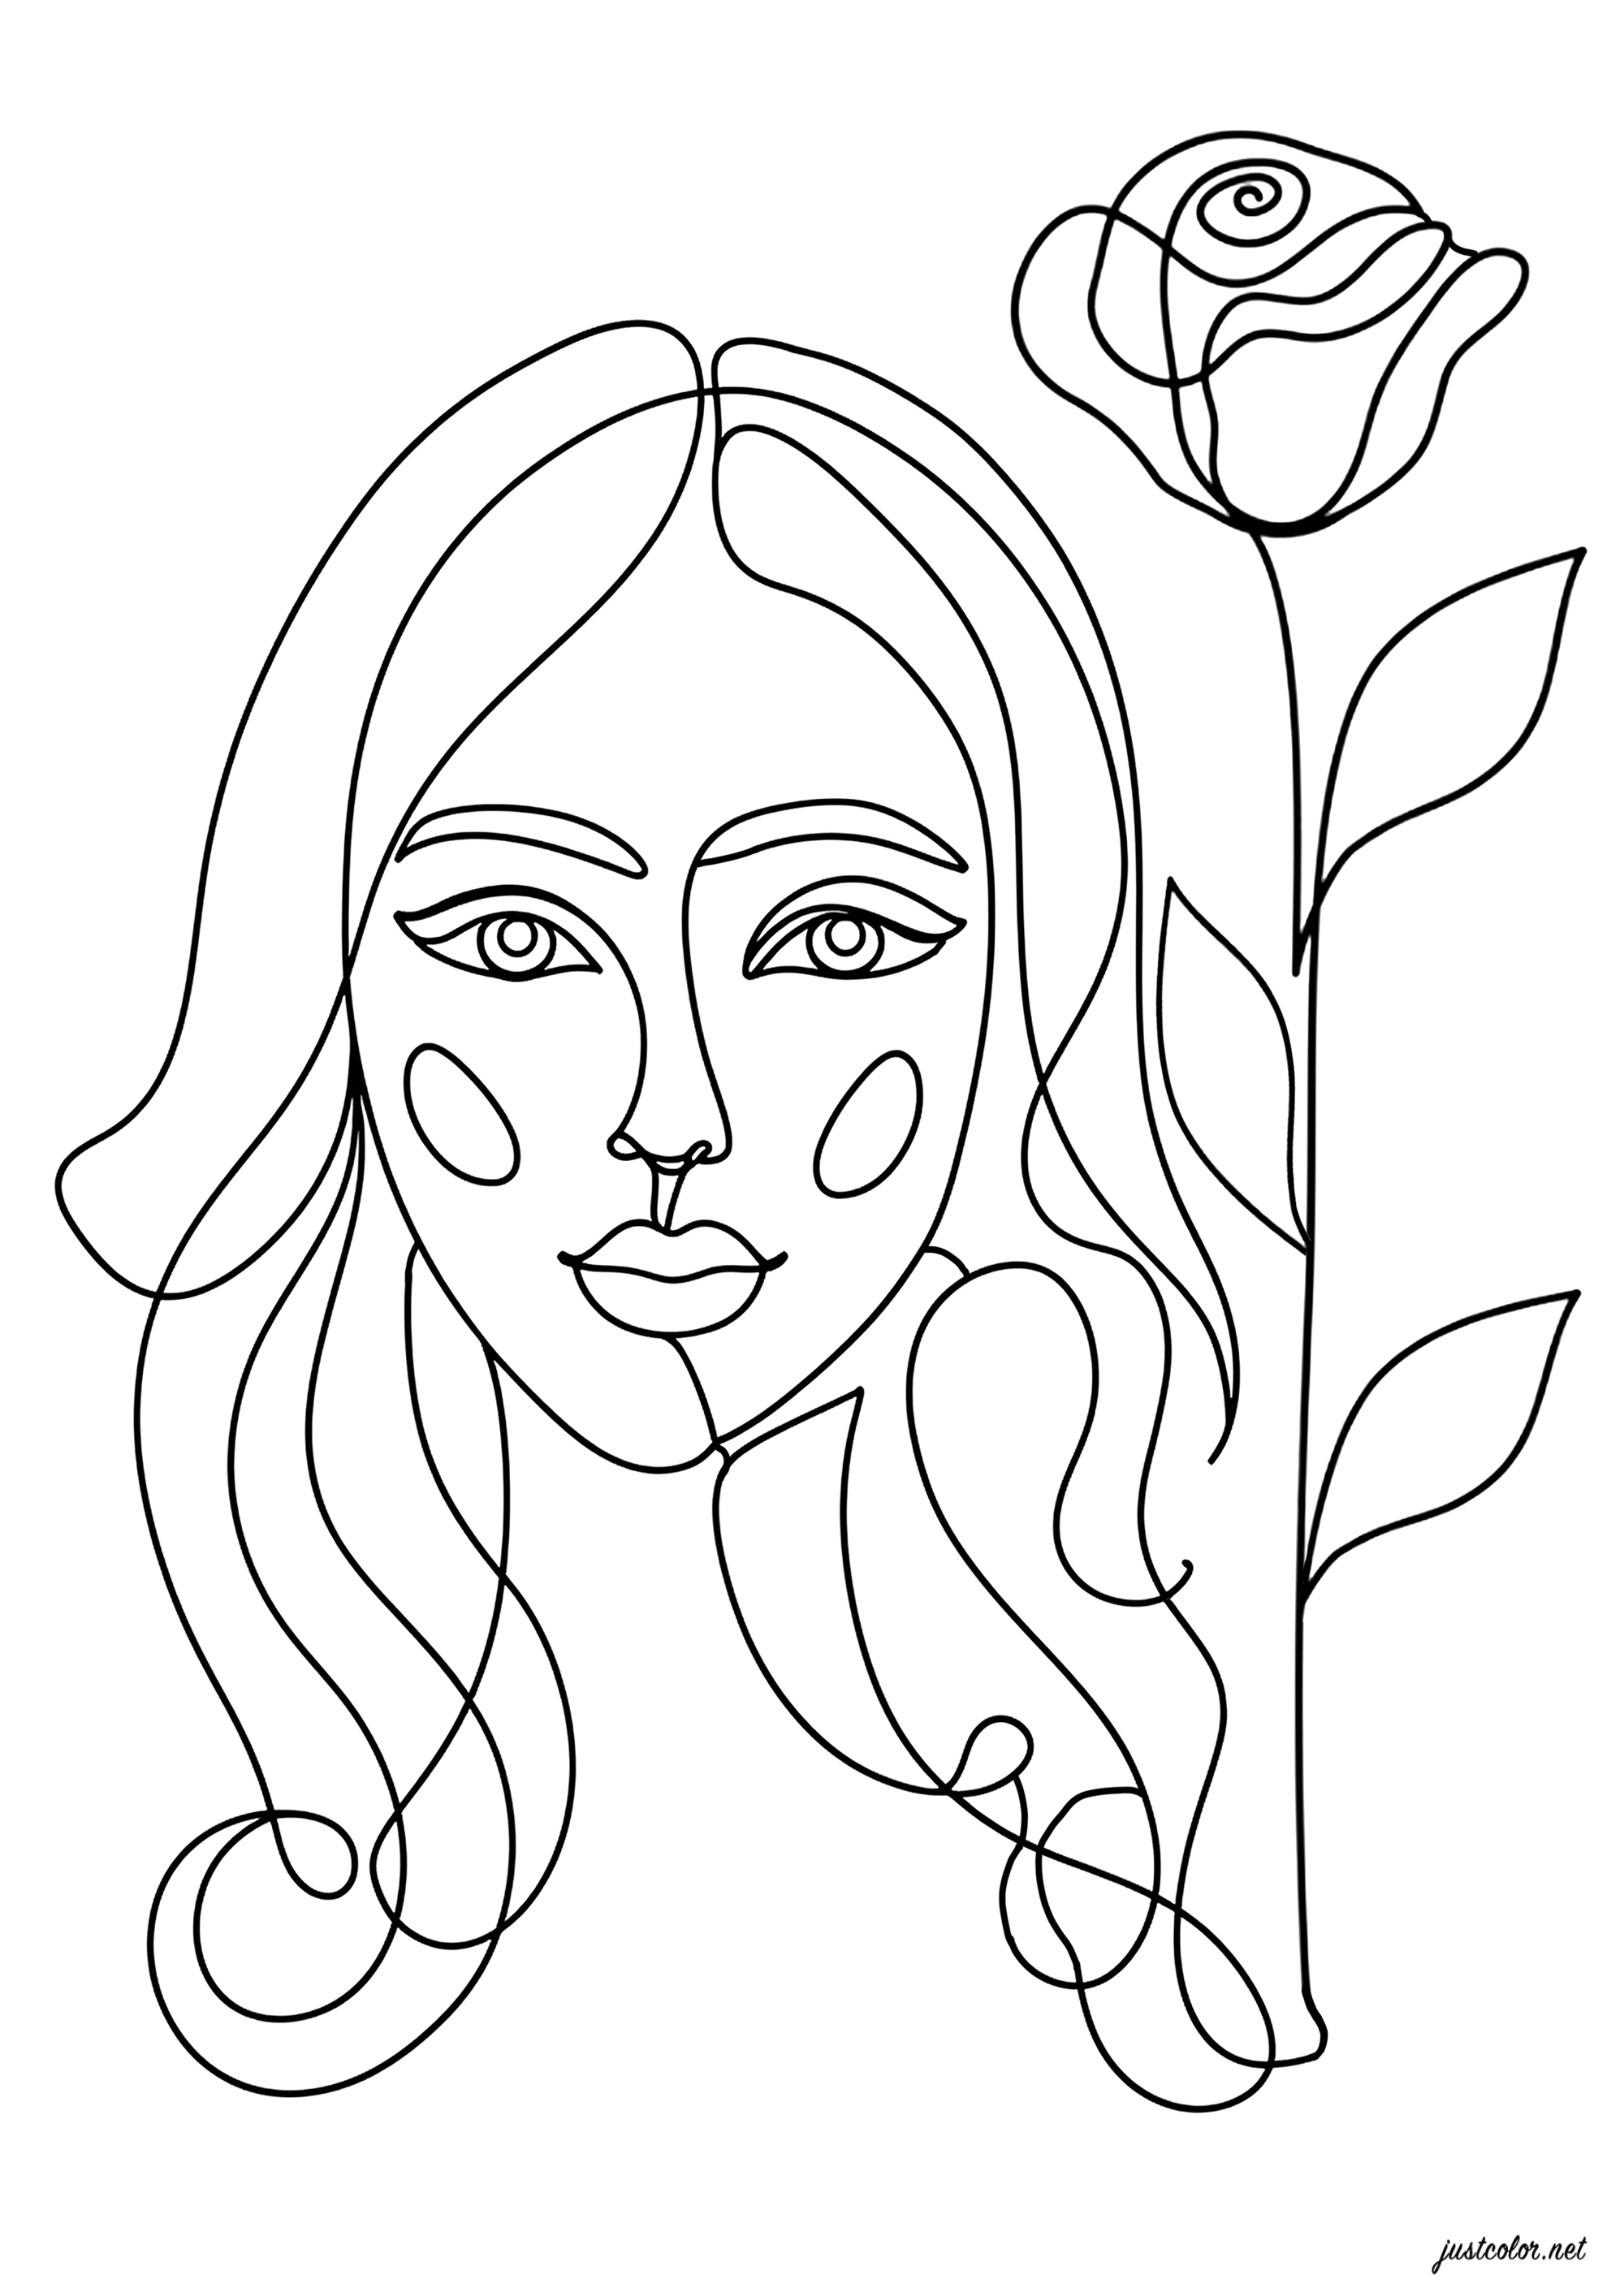 Woman and pretty rose (Line art). Line art is characterized by the exclusive use of continuous lines to create images, without recourse to color or fill.